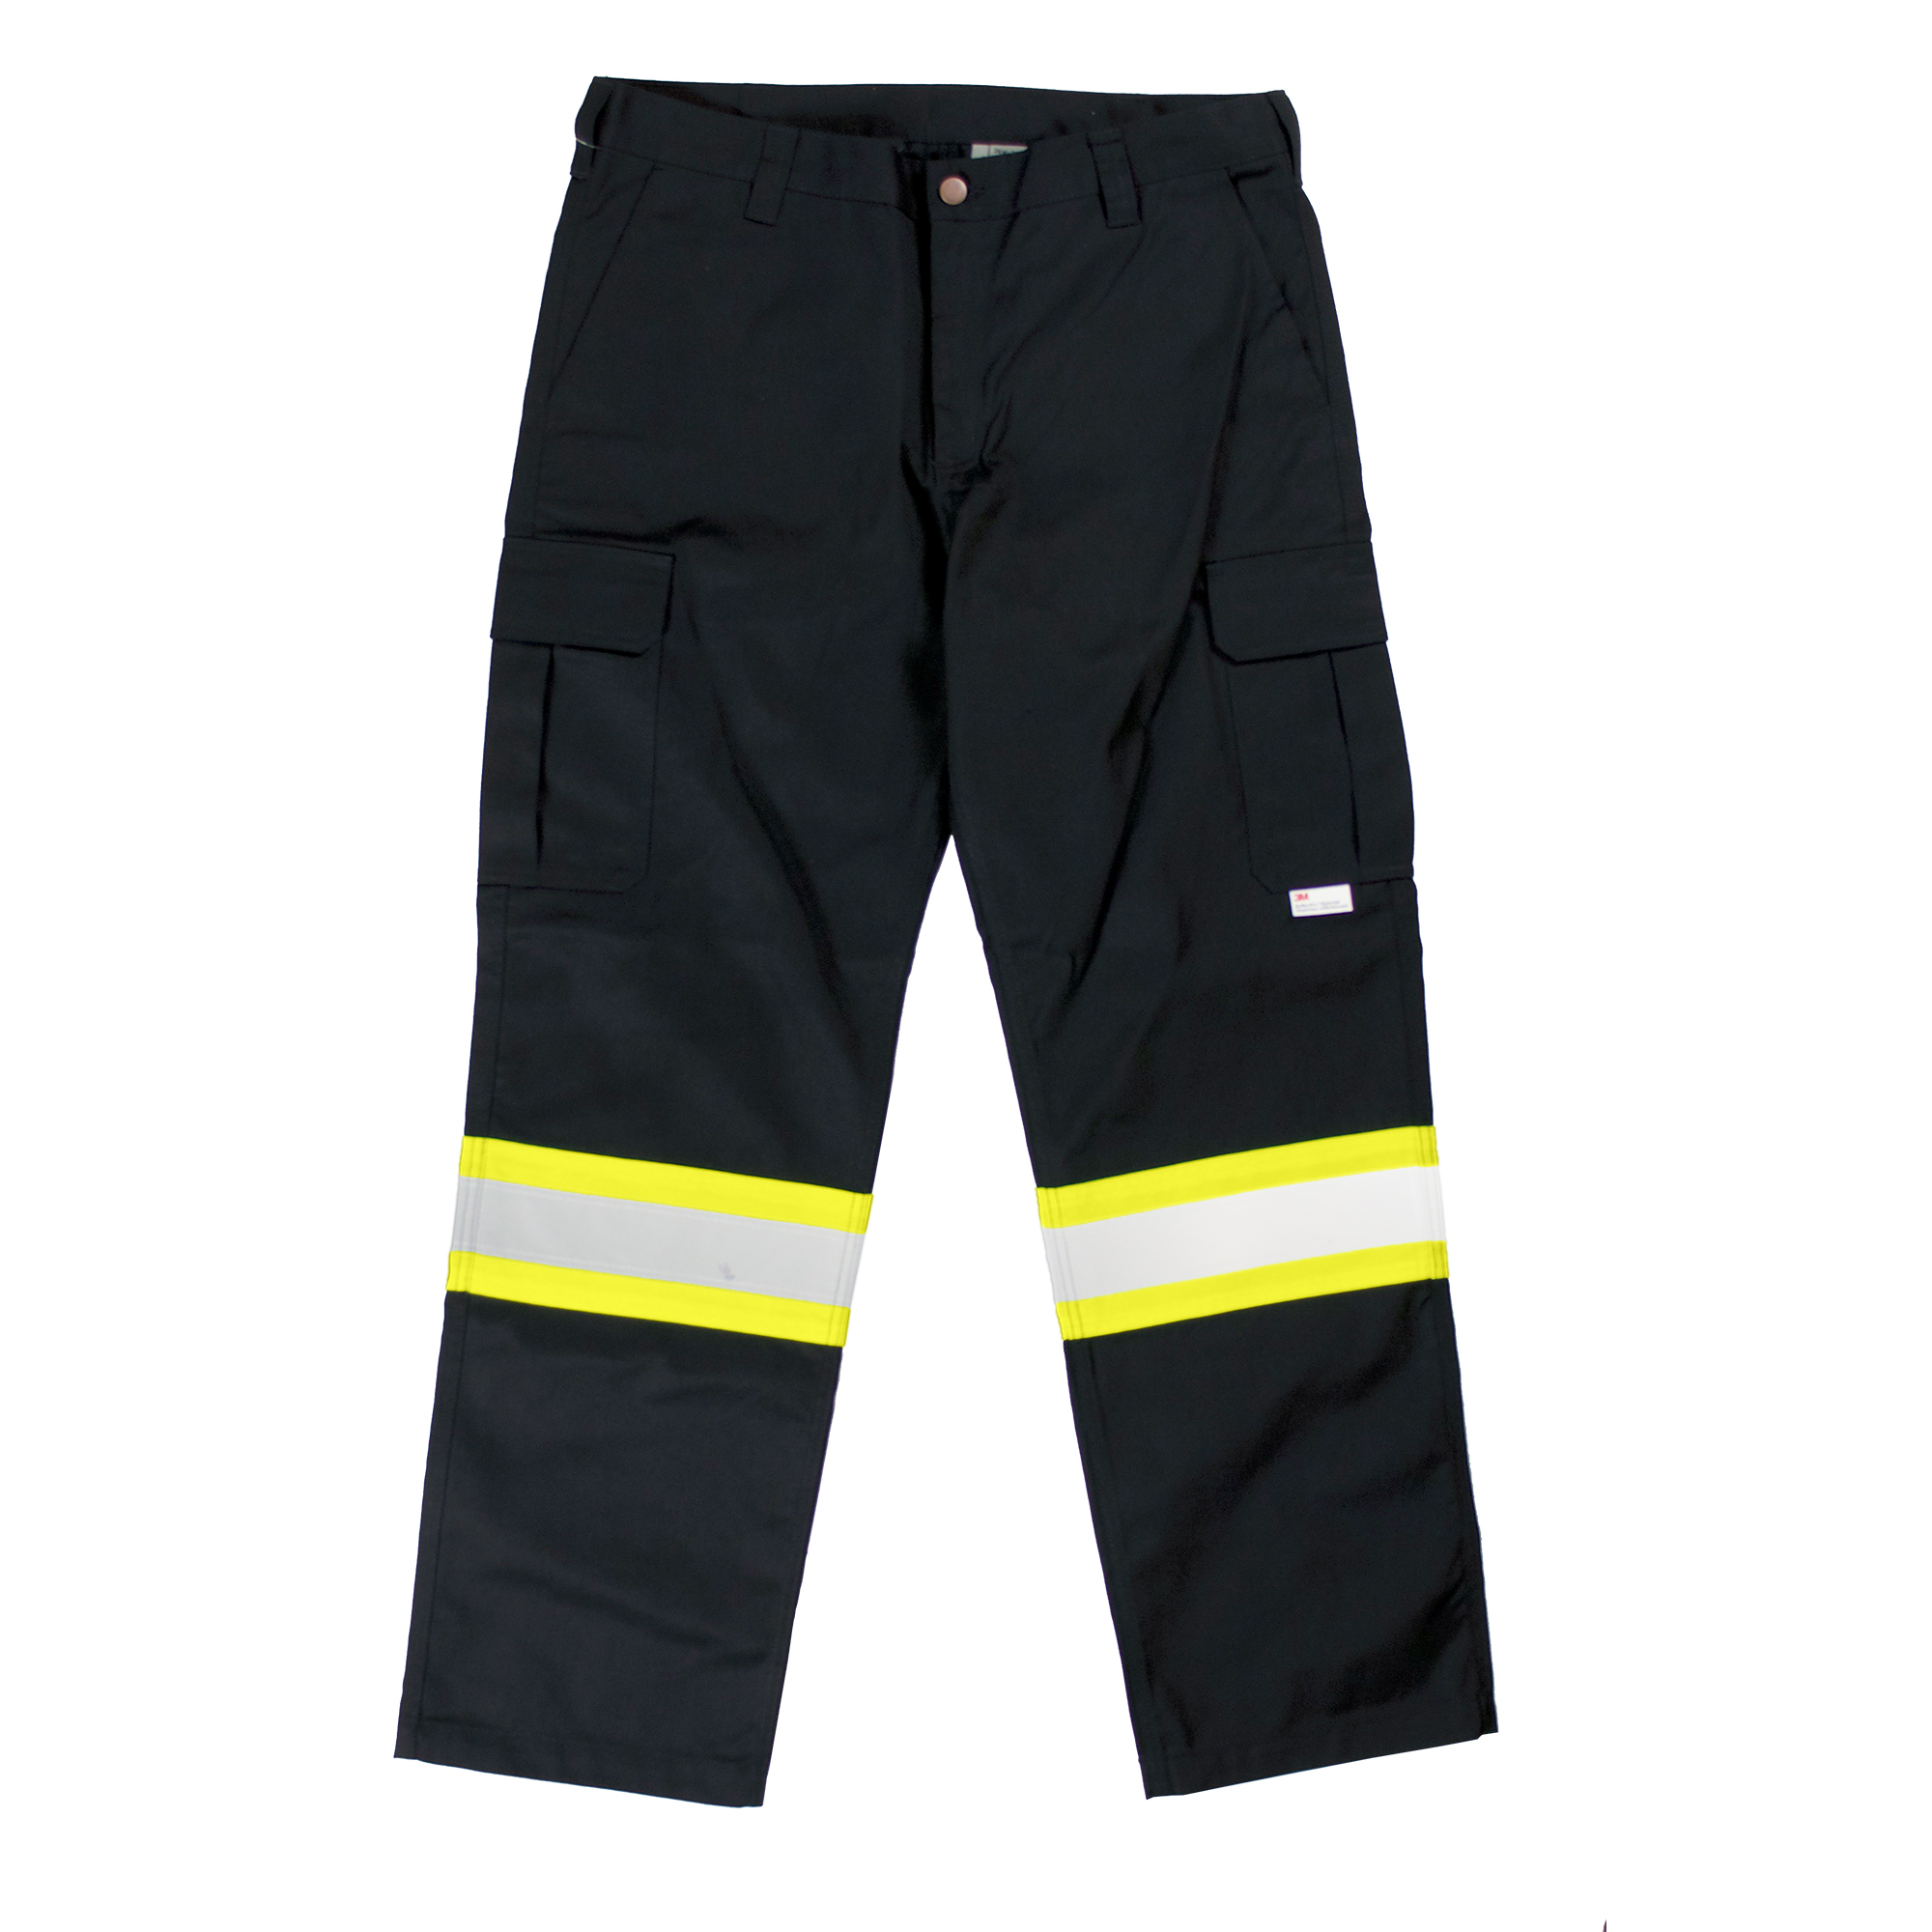 Tough Duck, Safety Cargo Utility Pant, Waist 30 in, Inseam 30 in, Color Black, Model S60701